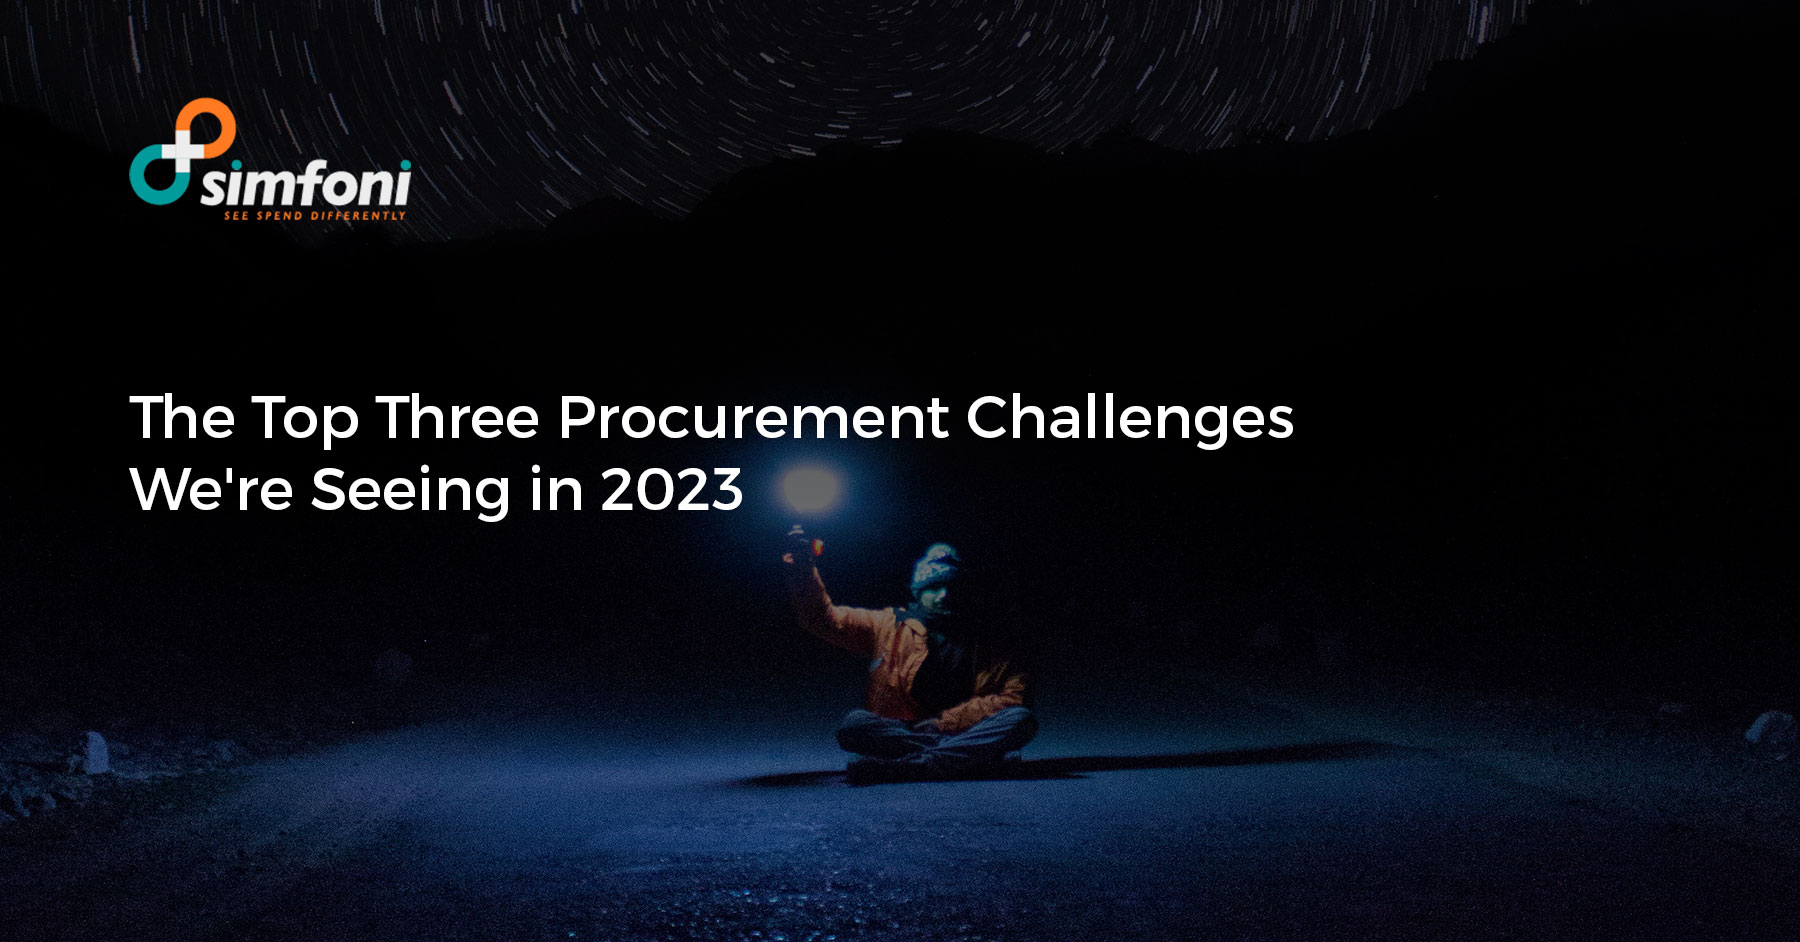 The Top Three Procurement Challenges We’re Seeing in 2023